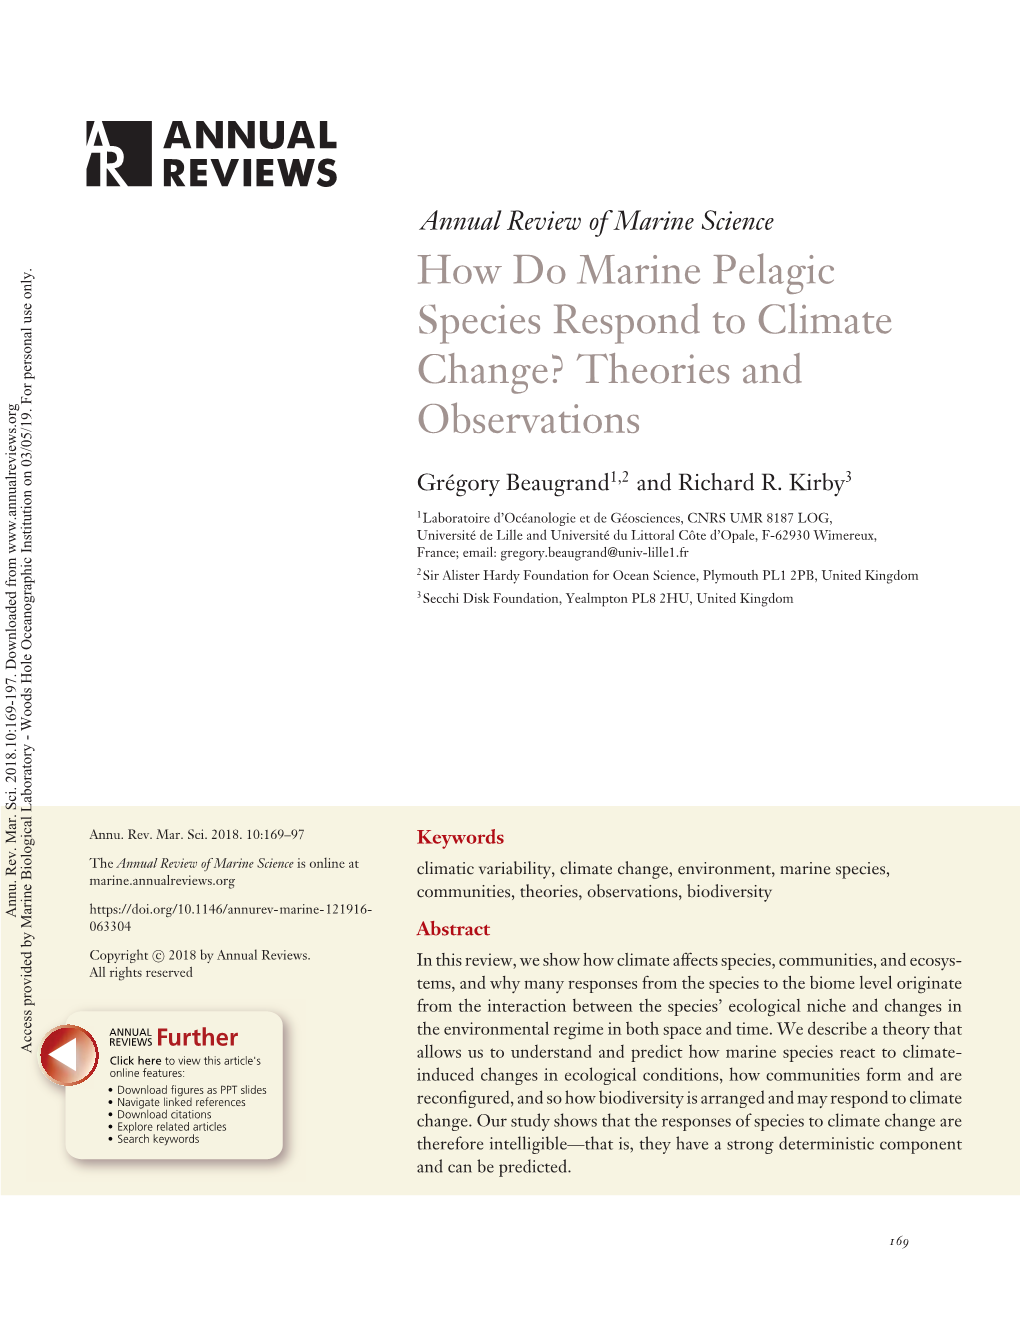 How Do Marine Pelagic Species Respond to Climate Change? Theories and Observations